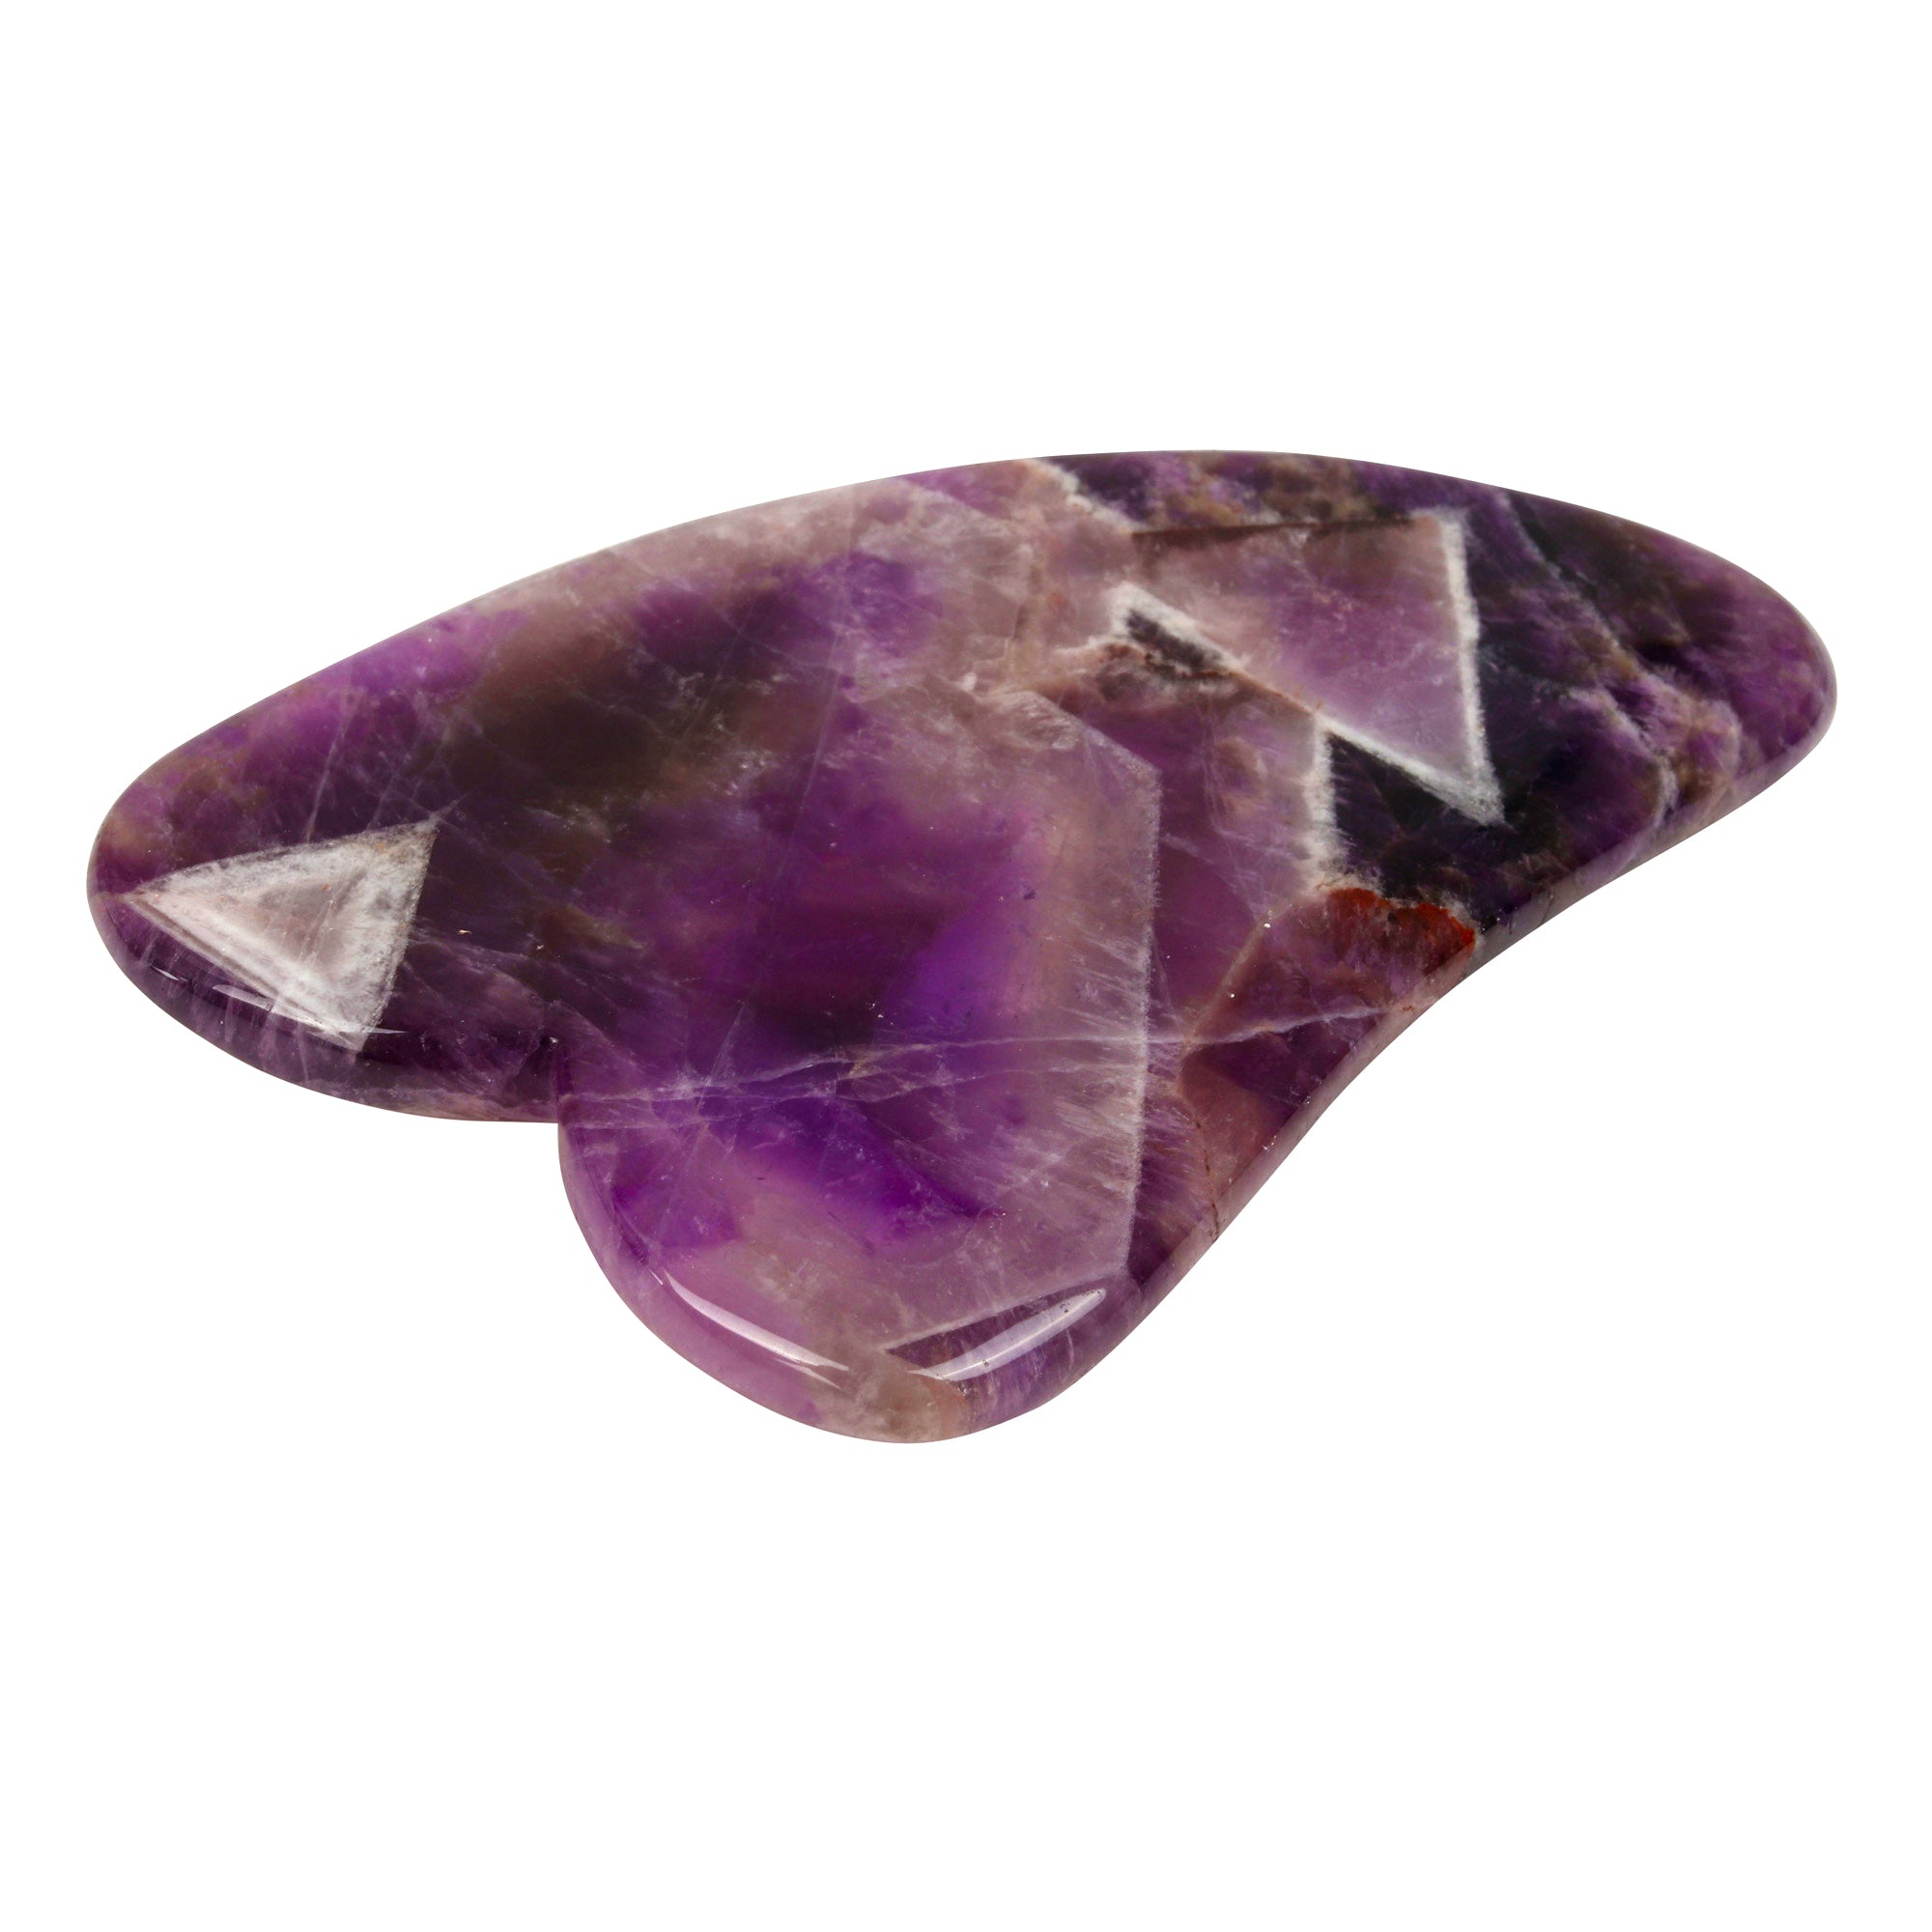 All about Amethyst Crystal